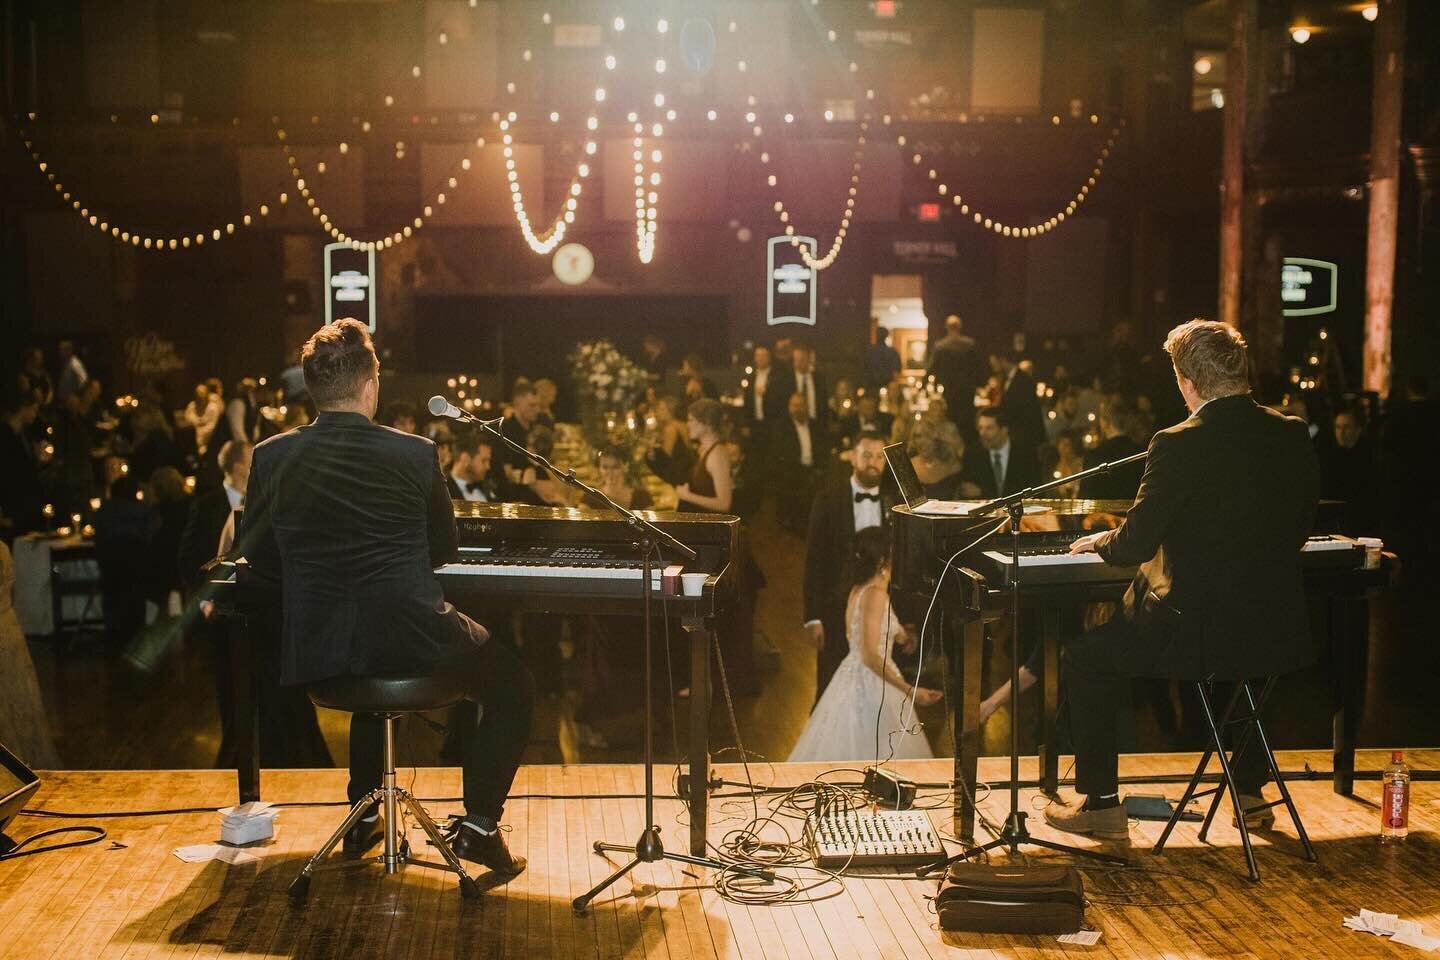 A big stage means even bigger entertainment opportunities! If you had an unlimited budget, what band would you book at your wedding? 🎶

Photo by @degrootfilmco